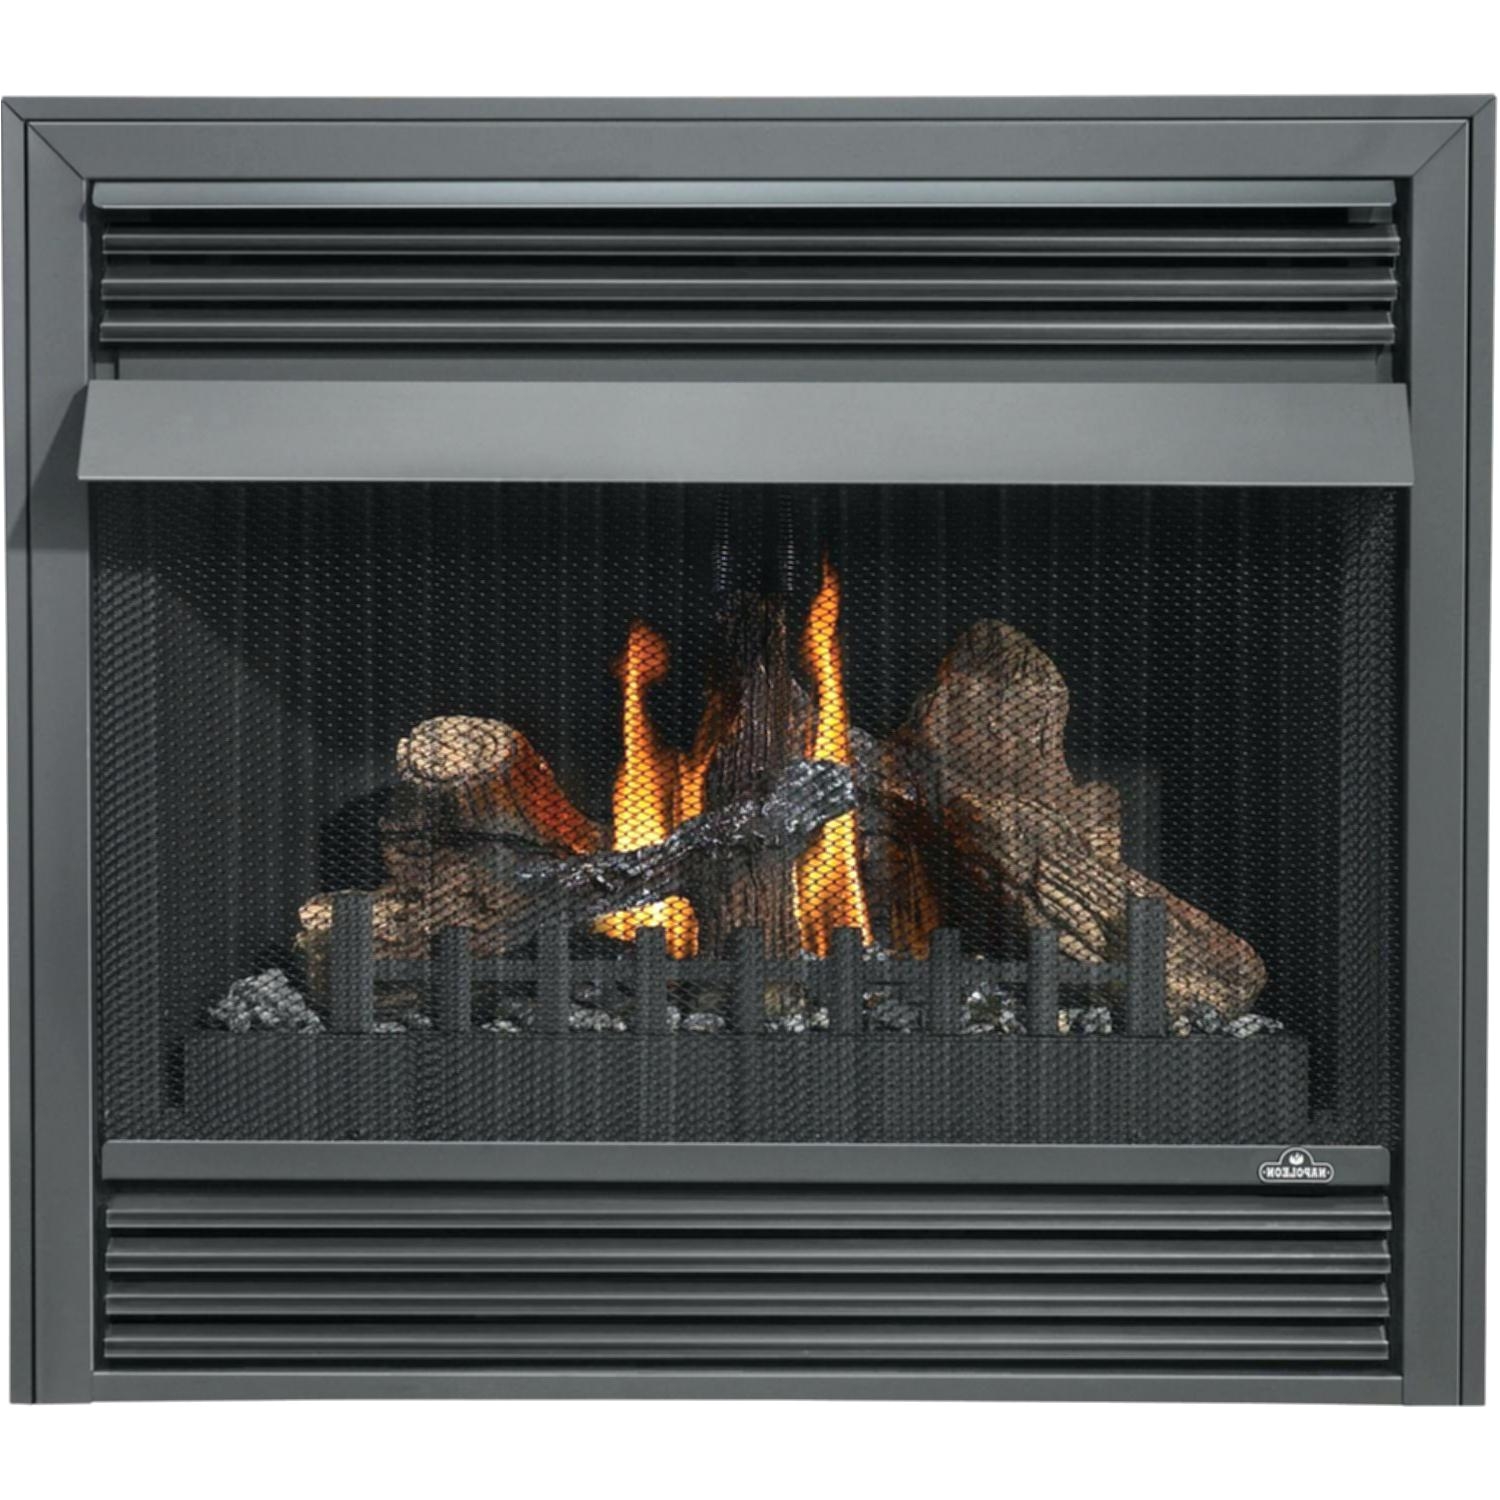 Superior Gas Fireplace Parts Lovely Lennox Gas Fireplace Parts Canada Gas Fireplace Parts Simple